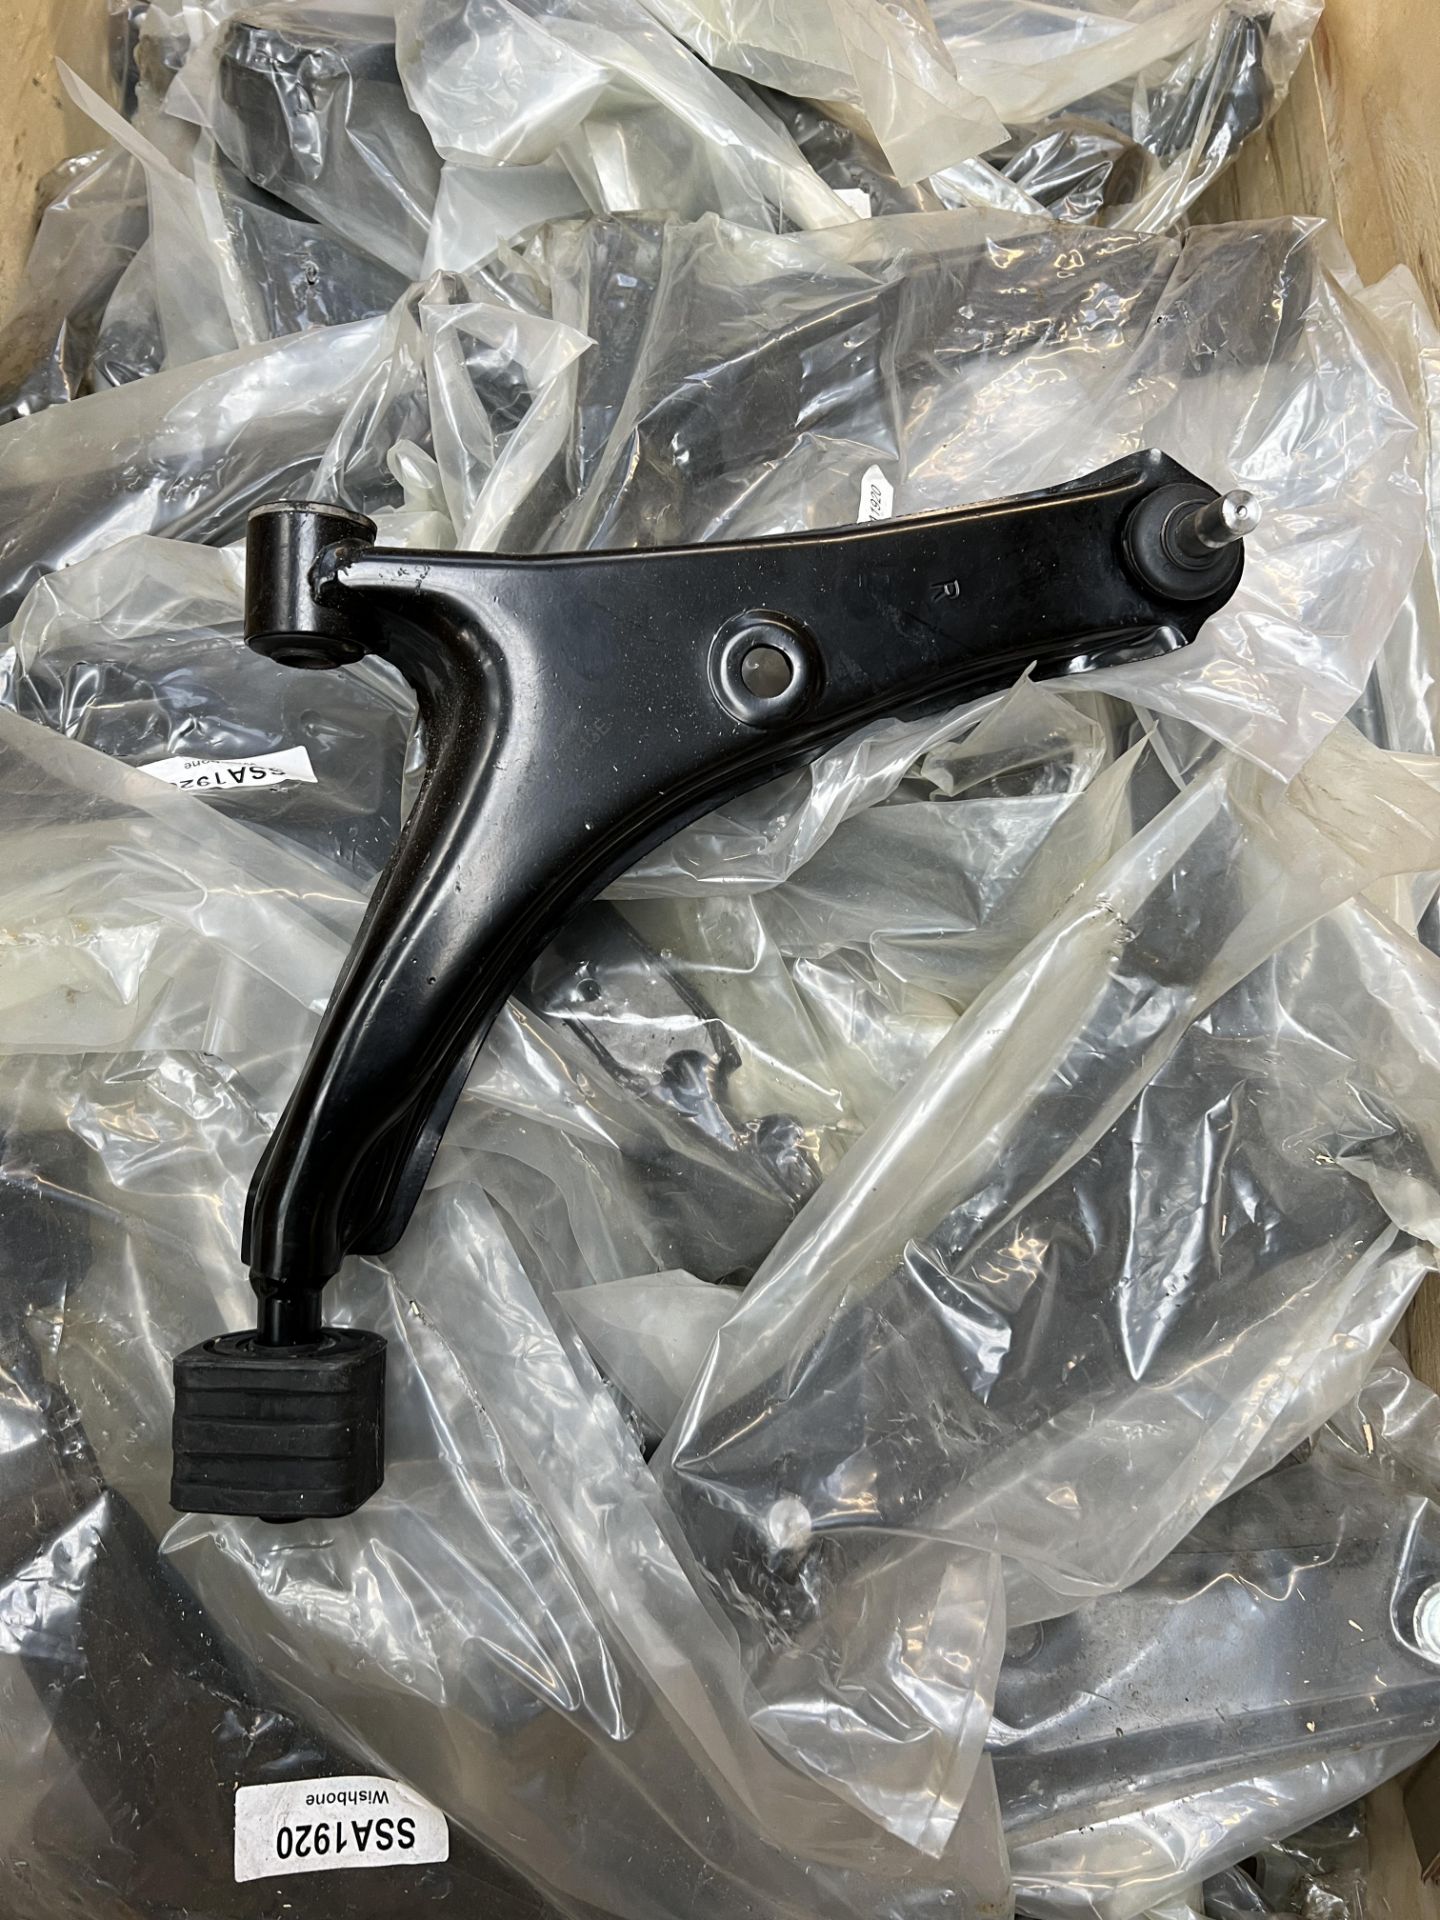 One Crate of approx 130 FCA5975 RH Wishbones for Suzuki Swift - approx £30 online value each - Image 3 of 4